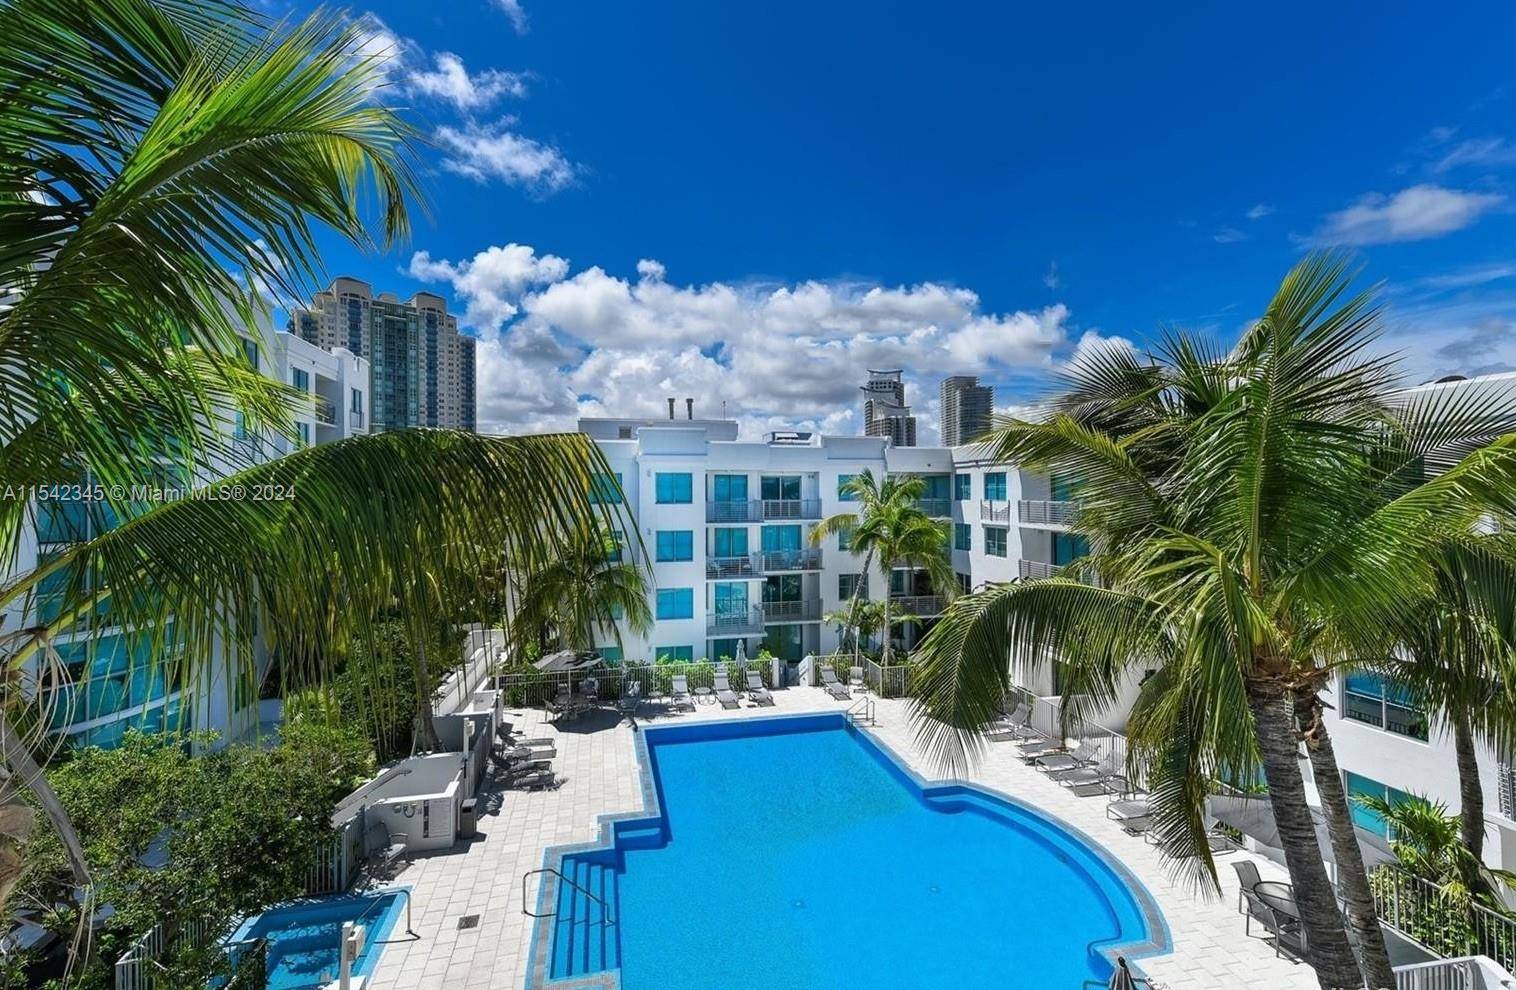 Enjoy living for seven months of your life in the heart of South Beach, located in the prestigious South of Fifth neighborhood, at this elegantly designed 2 bedroom, 2.